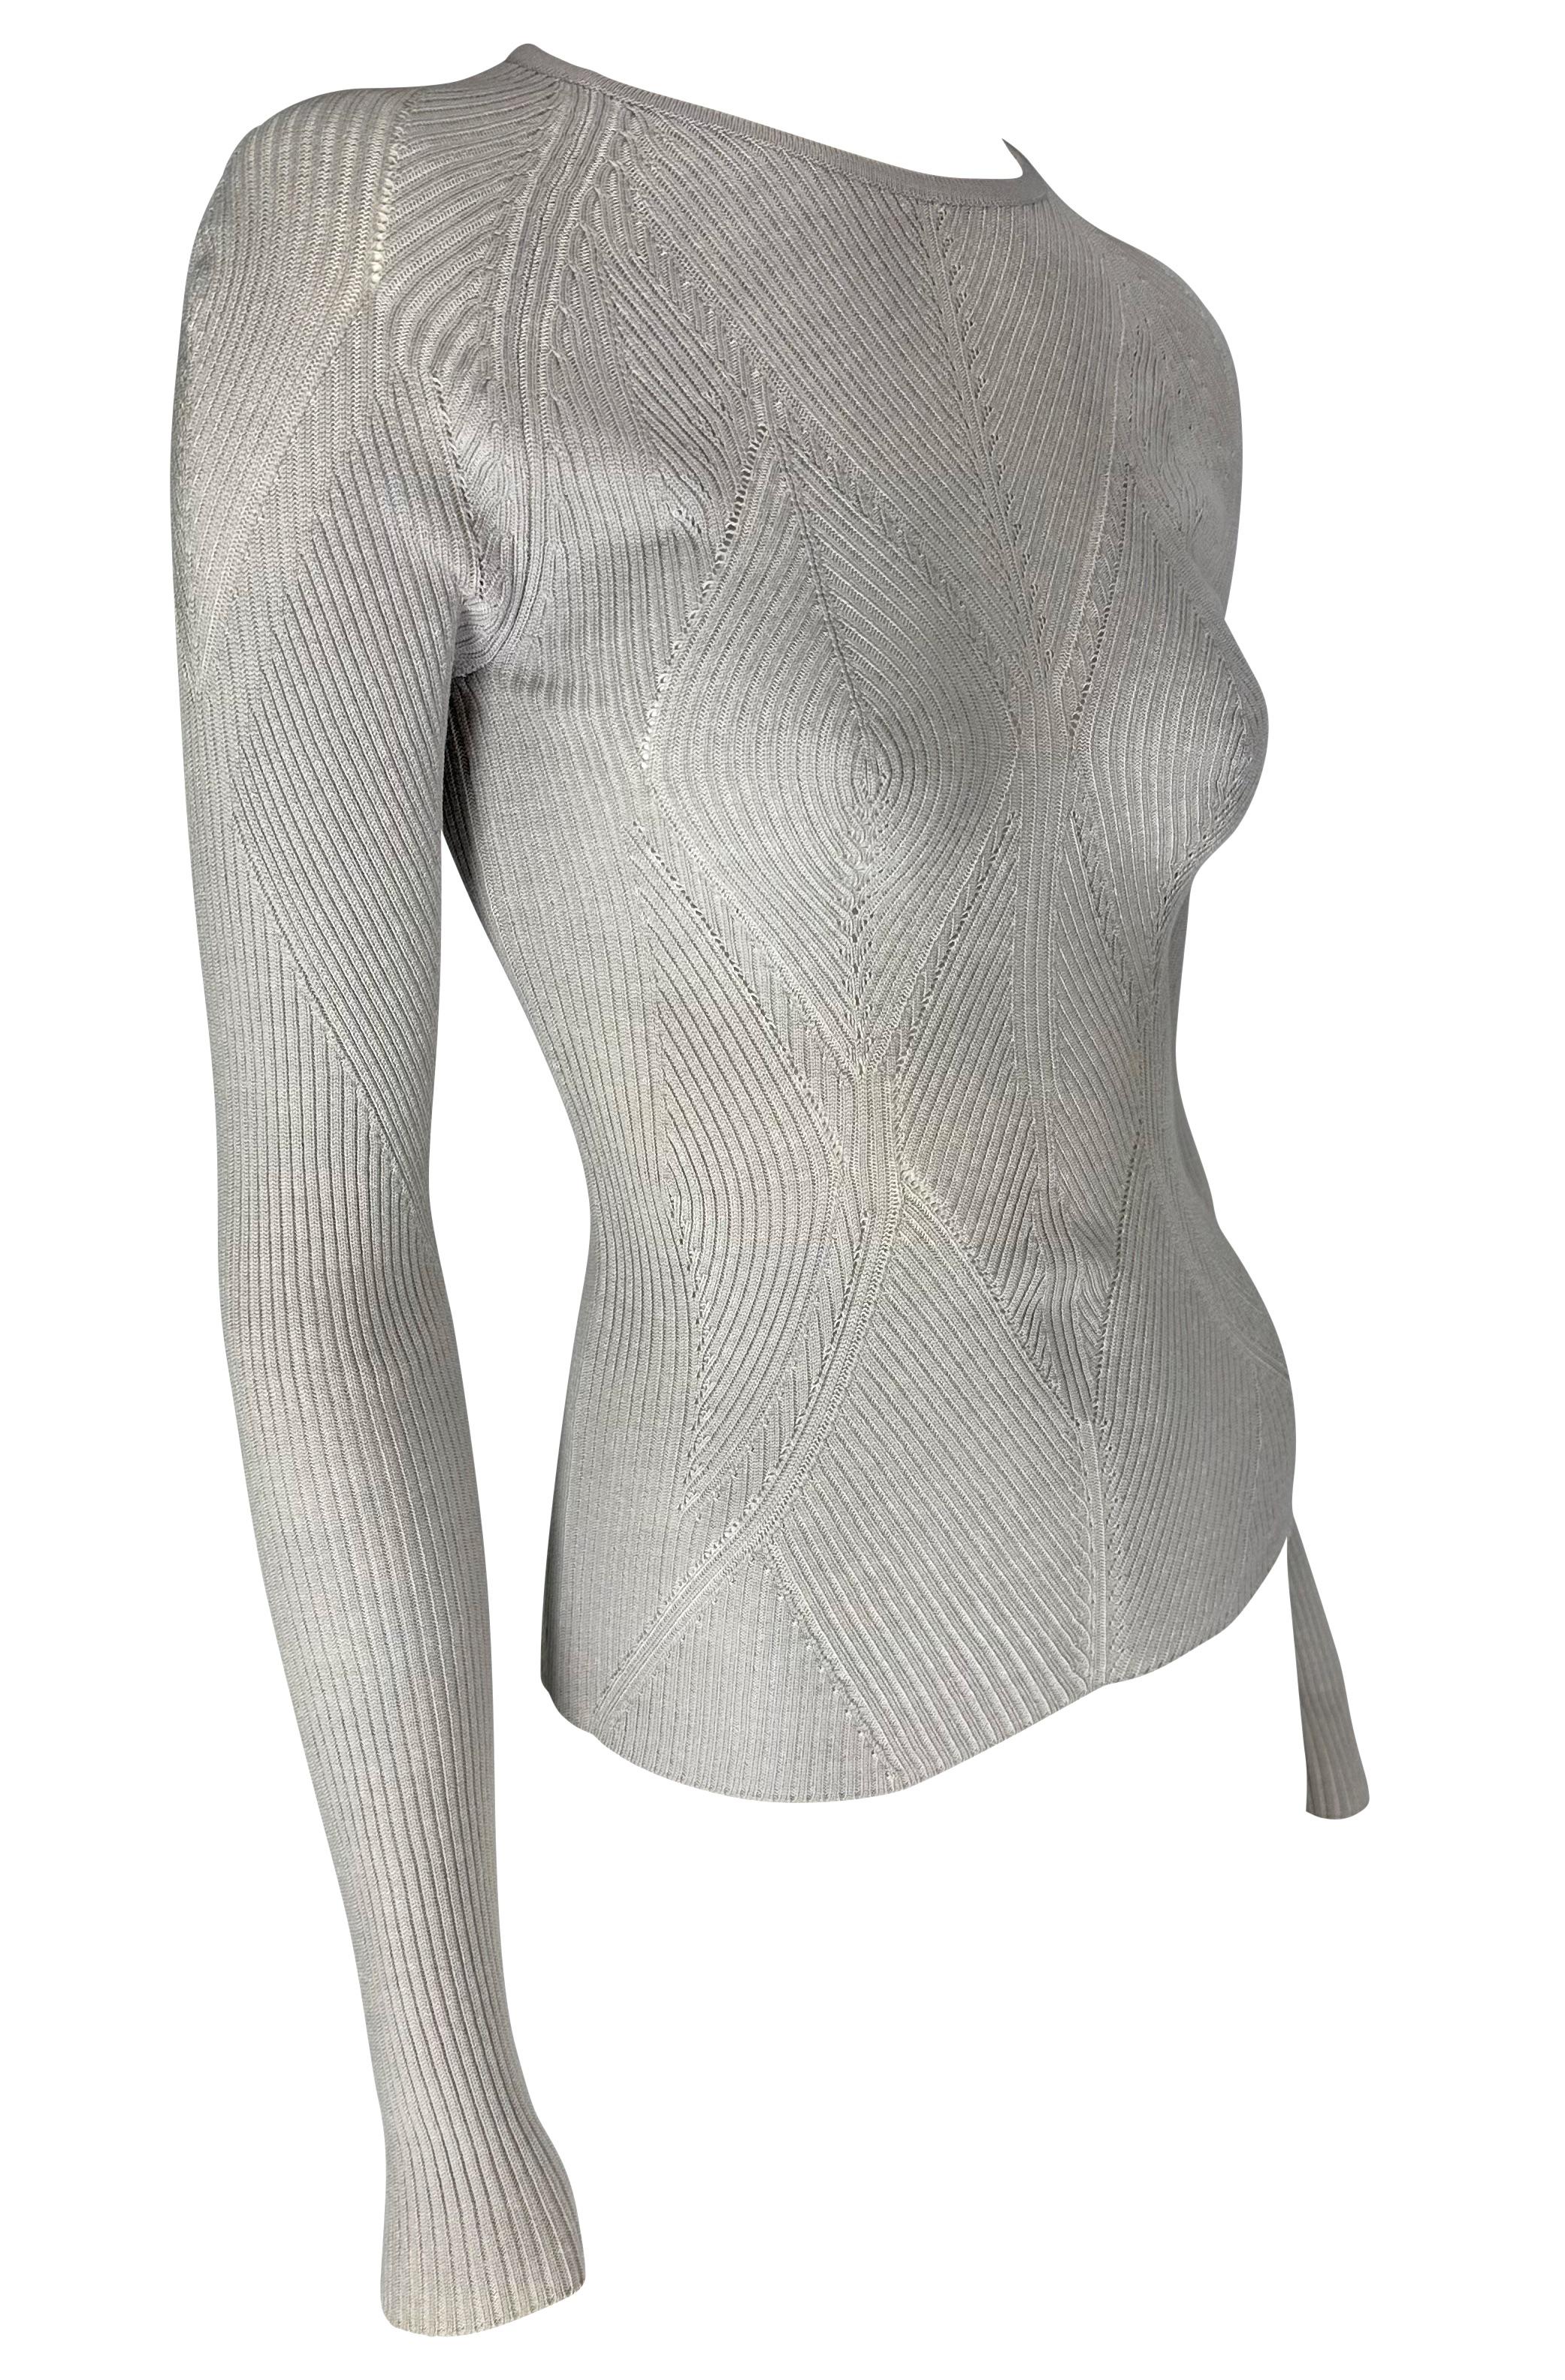 S/S 2003 Yves Saint Laurent by Tom Ford Breast Knit Stretch Lavender Sweater Top 3